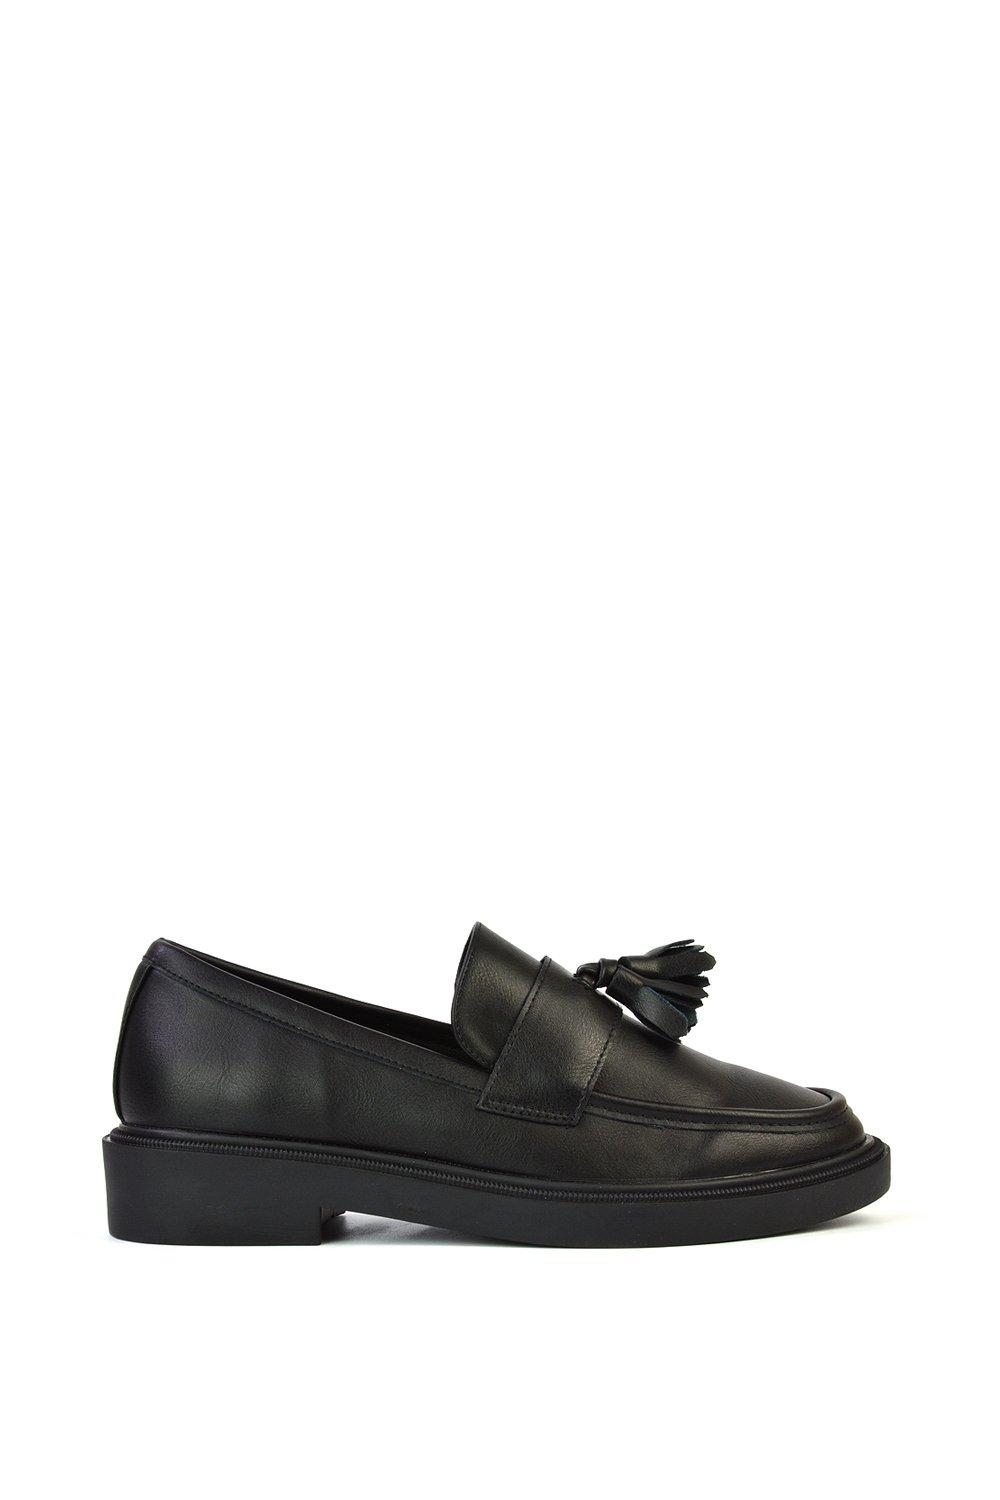 'Alida' Chunky Loafers Tassel Back To School Flat Shoes